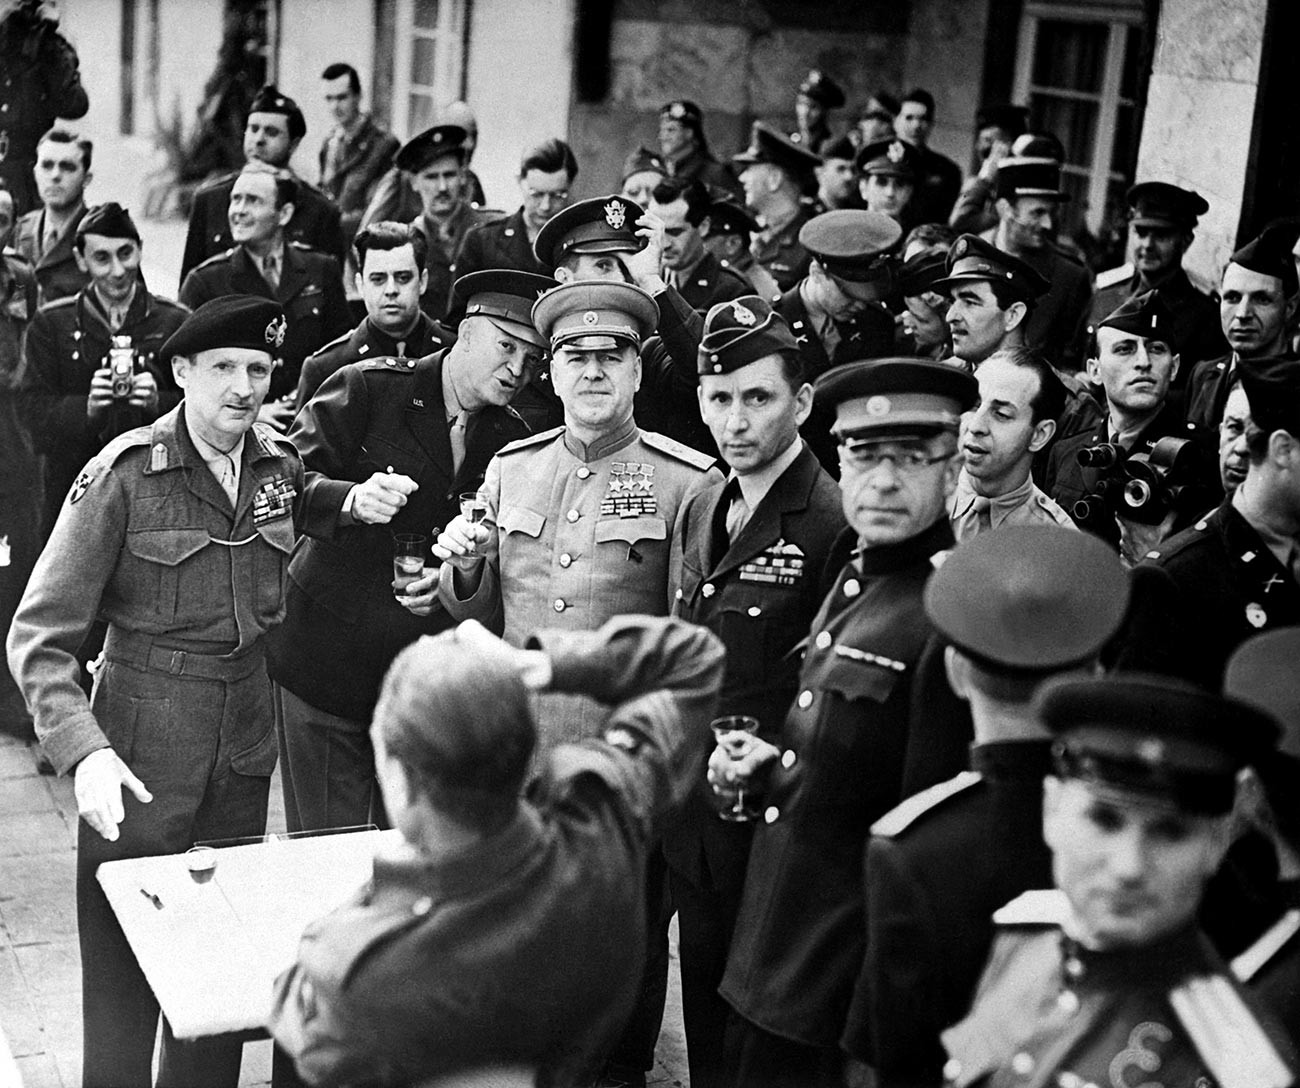 British Field Marshal Bernard Montgomery (left, wearing beret) was awarded the Order of Victory on June 5, 1945. American general Dwight Eisenhower and Soviet field marshal Georgy Zhukov, also recipients of the Order of Victory, are to the right of Montgomery. 